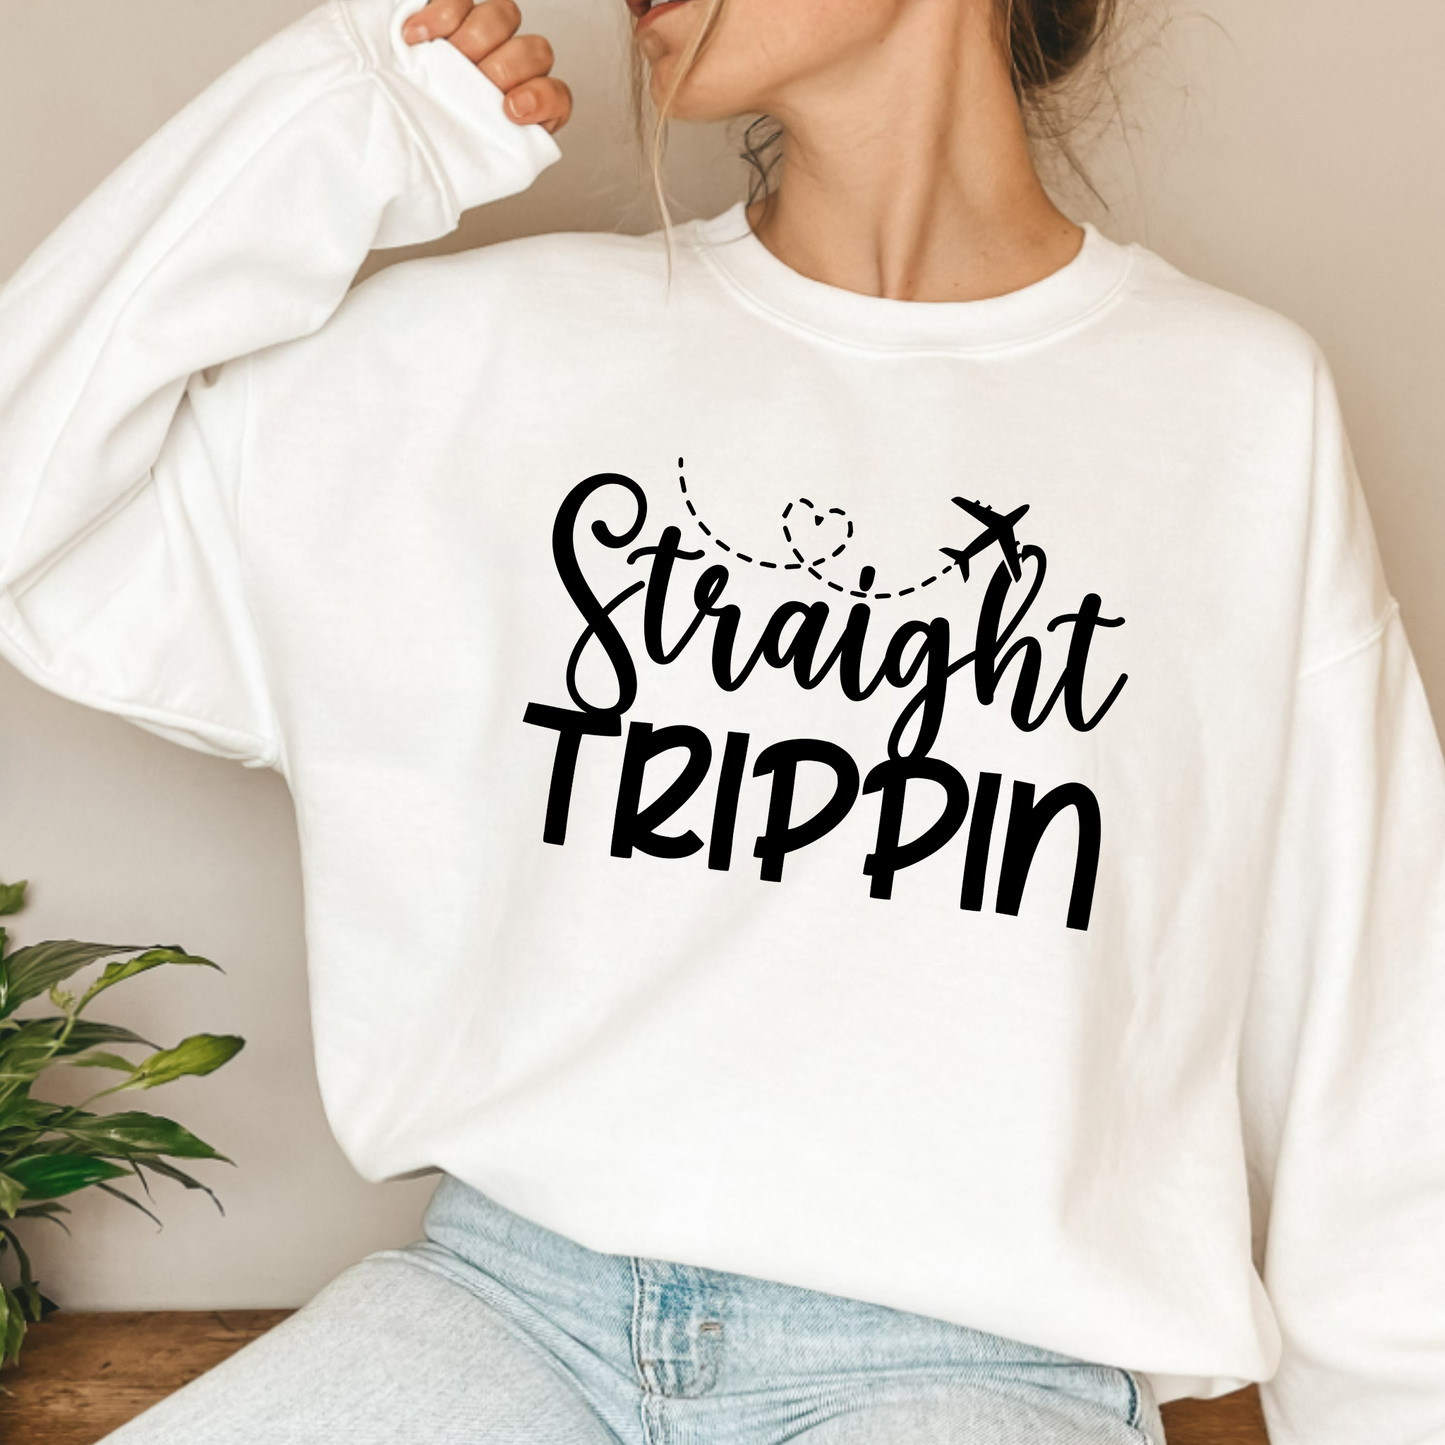 (shirt not included) Straight Trippin' in Black  - Screen print Transfer